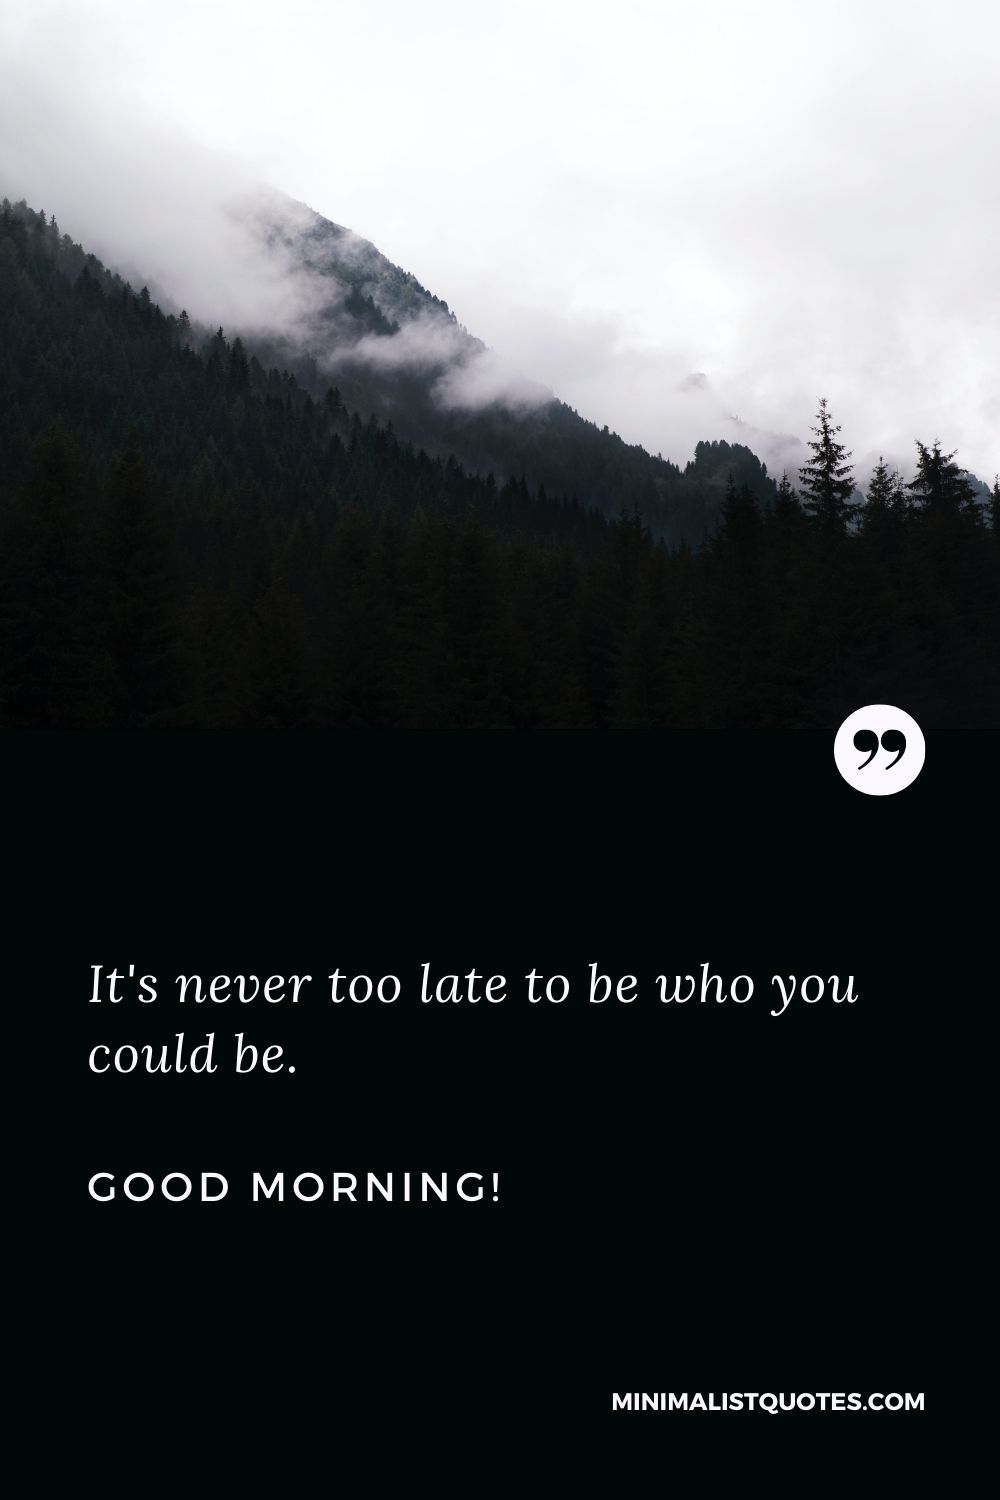 Thoughtful good morning message: It's never too late to be who you could be. Good Morning!